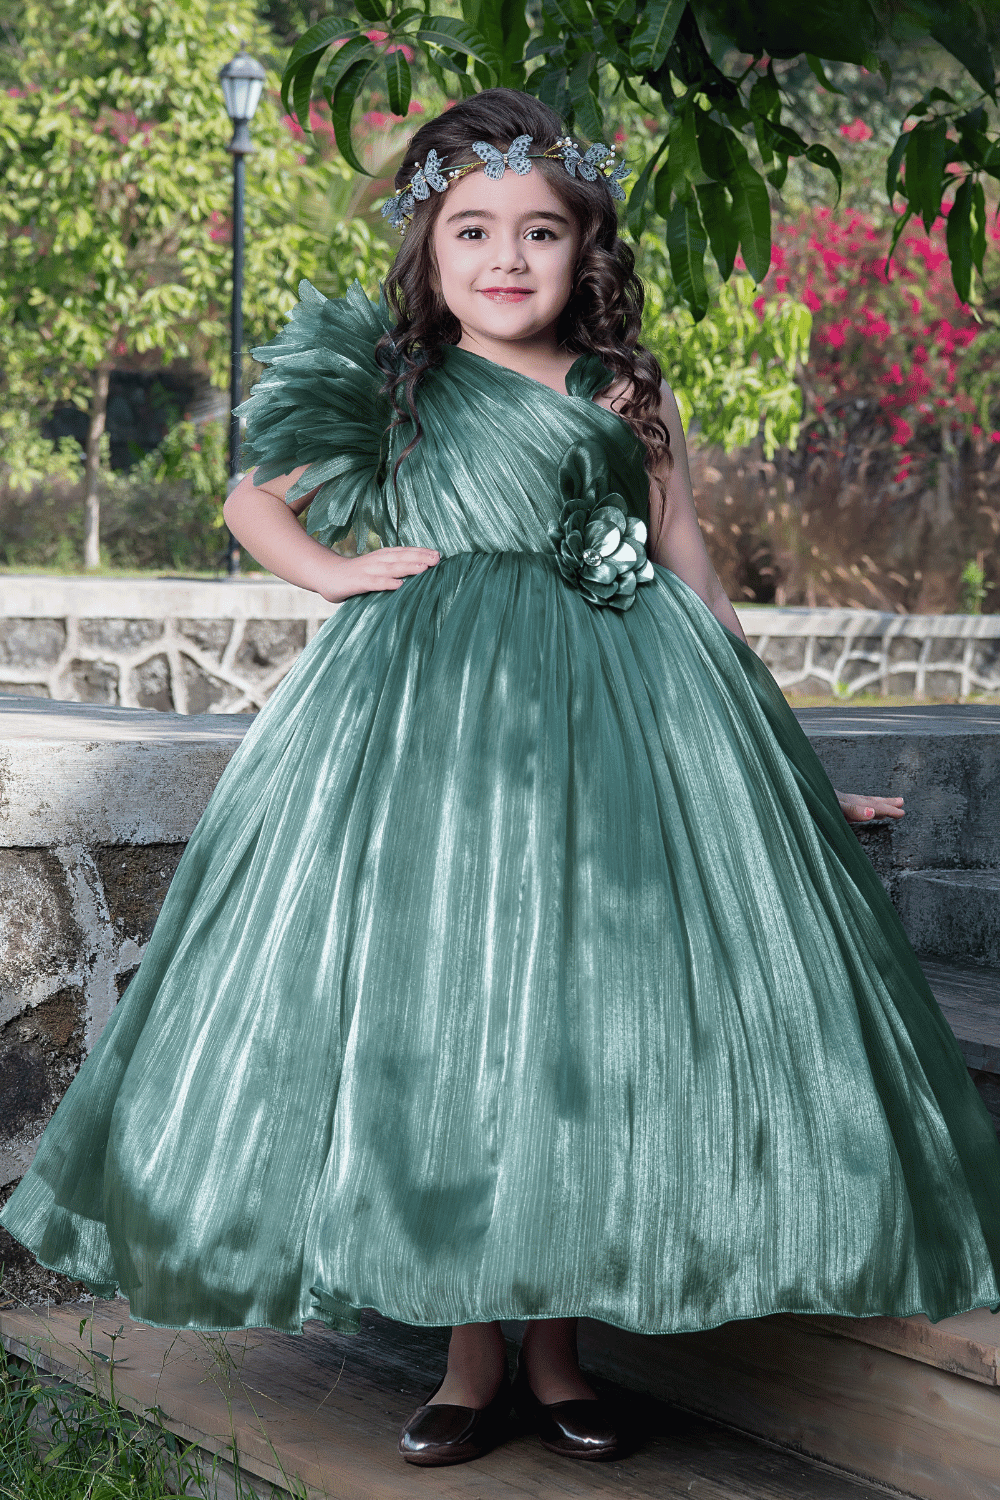 Where to Find the Perfect Party Dress for Your Little Girl - Seasons Chennai